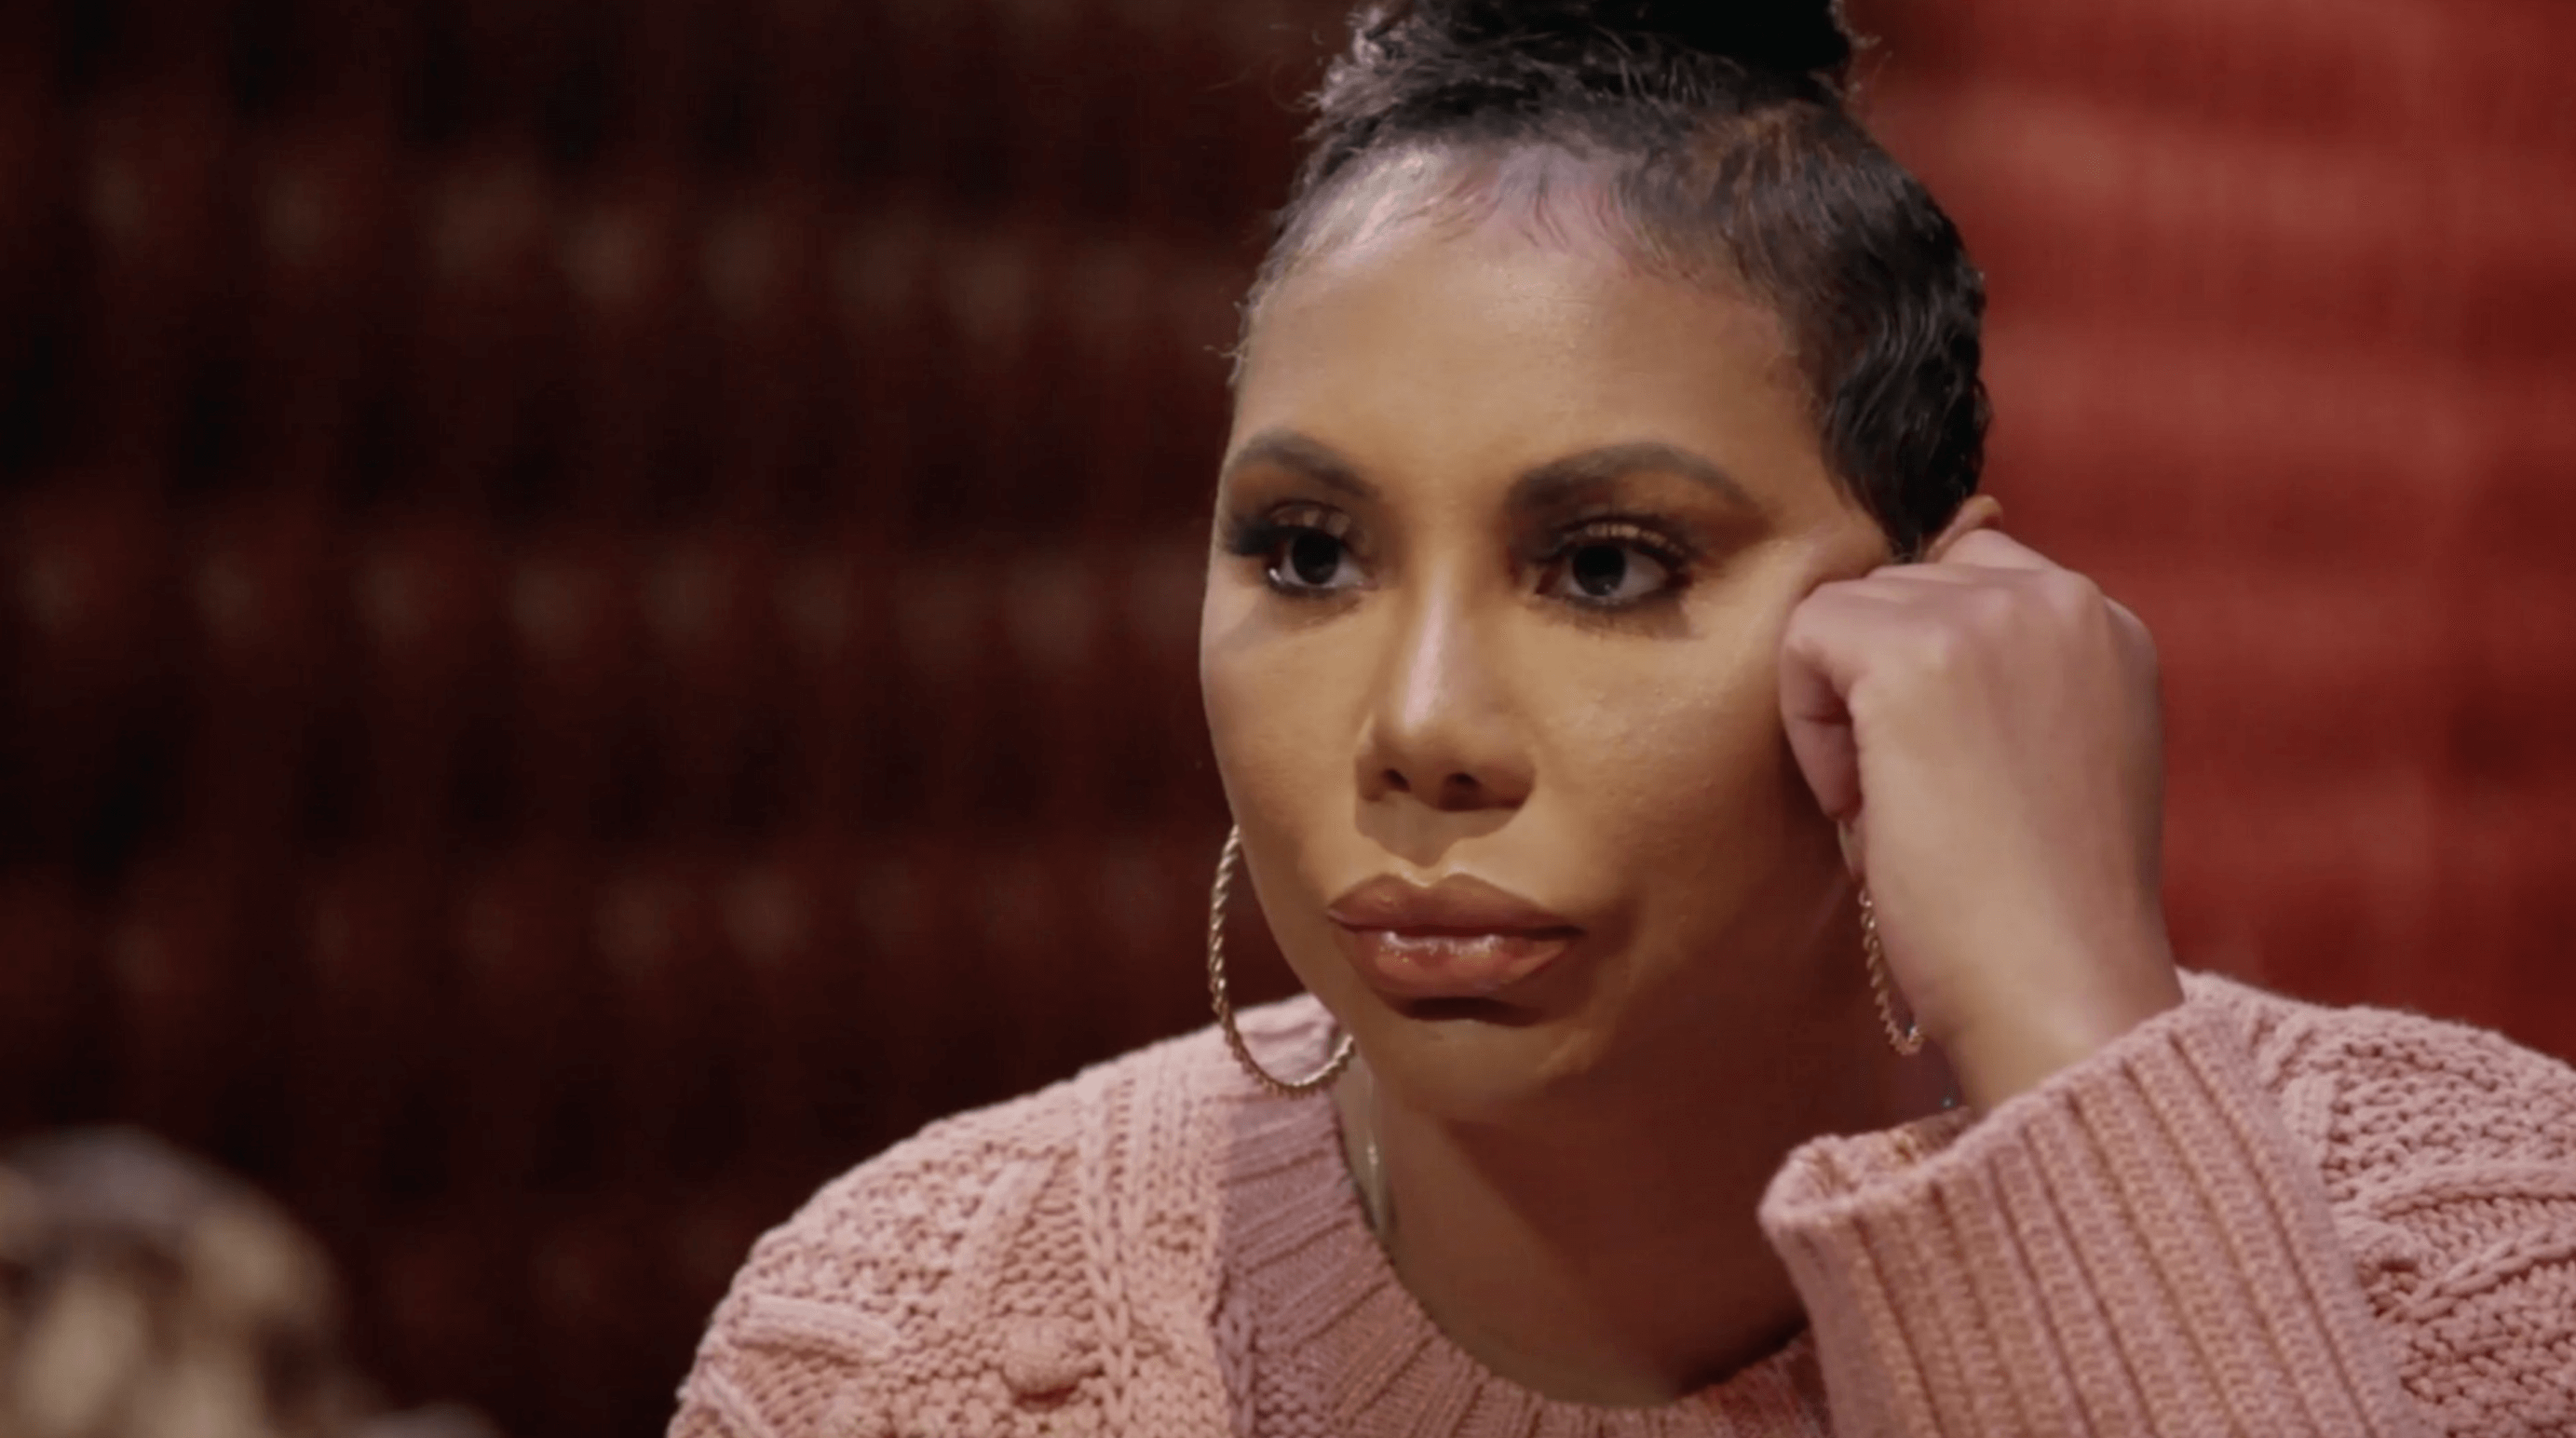 Tamar Braxton Calls Out Ex-Husband, Vince, For Blocking Communication With Their Son, Logan!